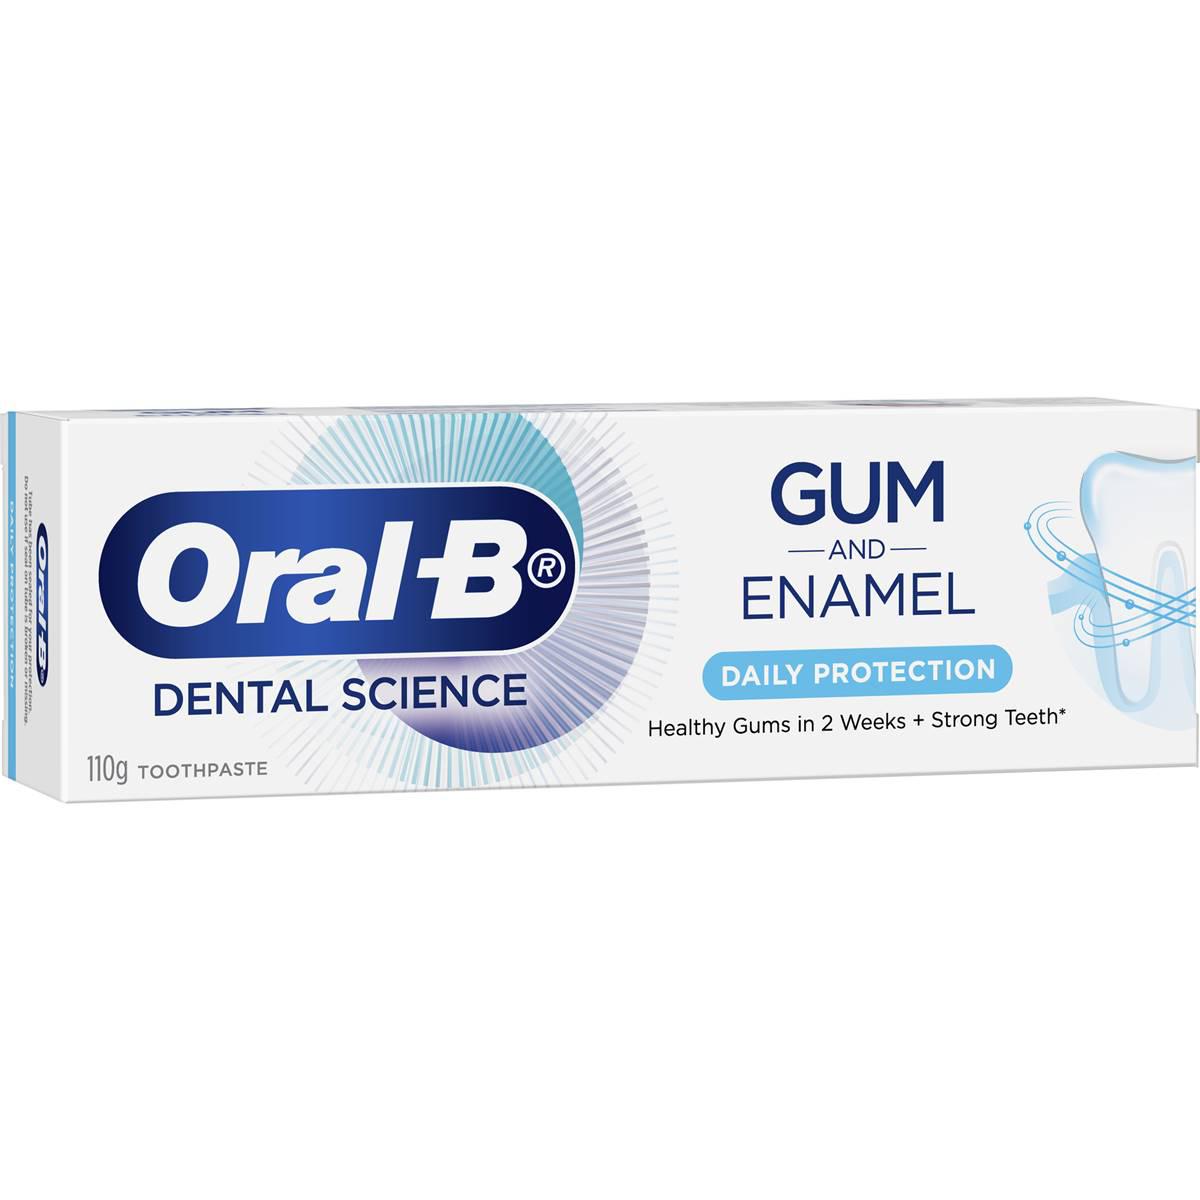 Oral B Gum Care & Enamel Daily Protection Mint Toothpaste 110g